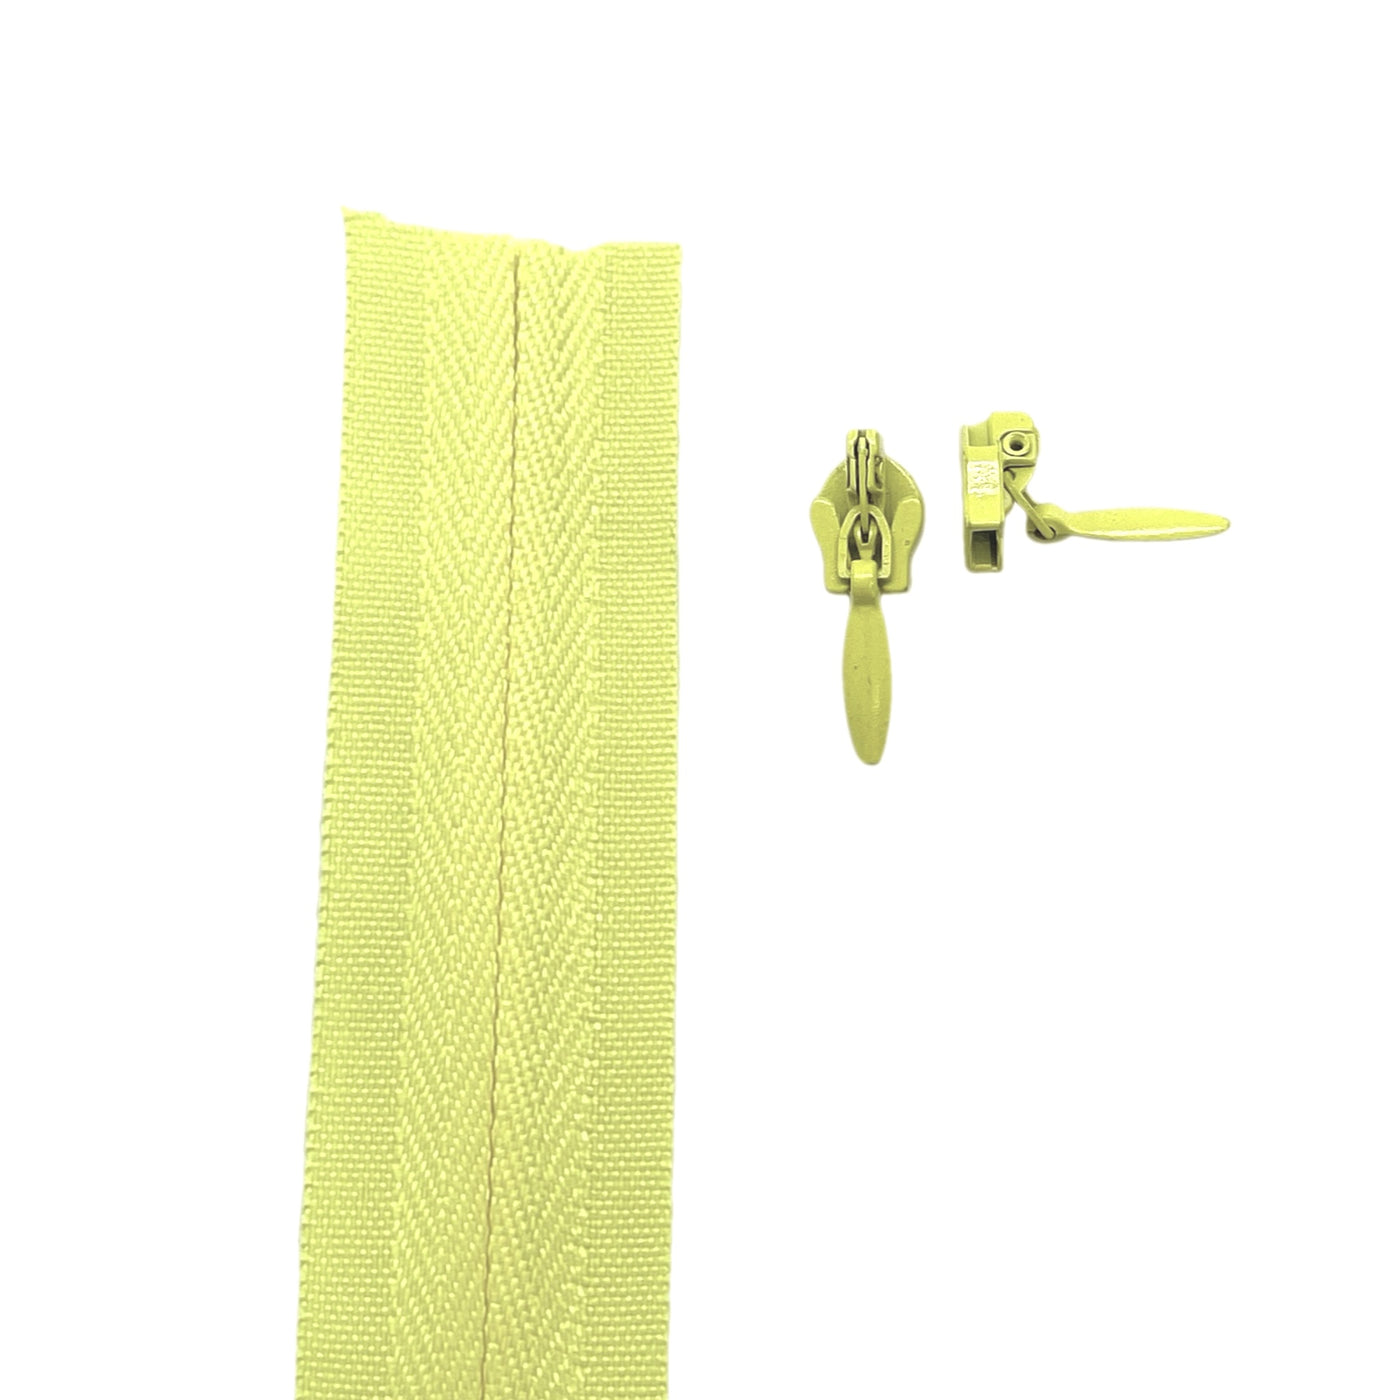 Light yellow Invisible continuous zipper roll in long chain style with sliders of 2 per metre